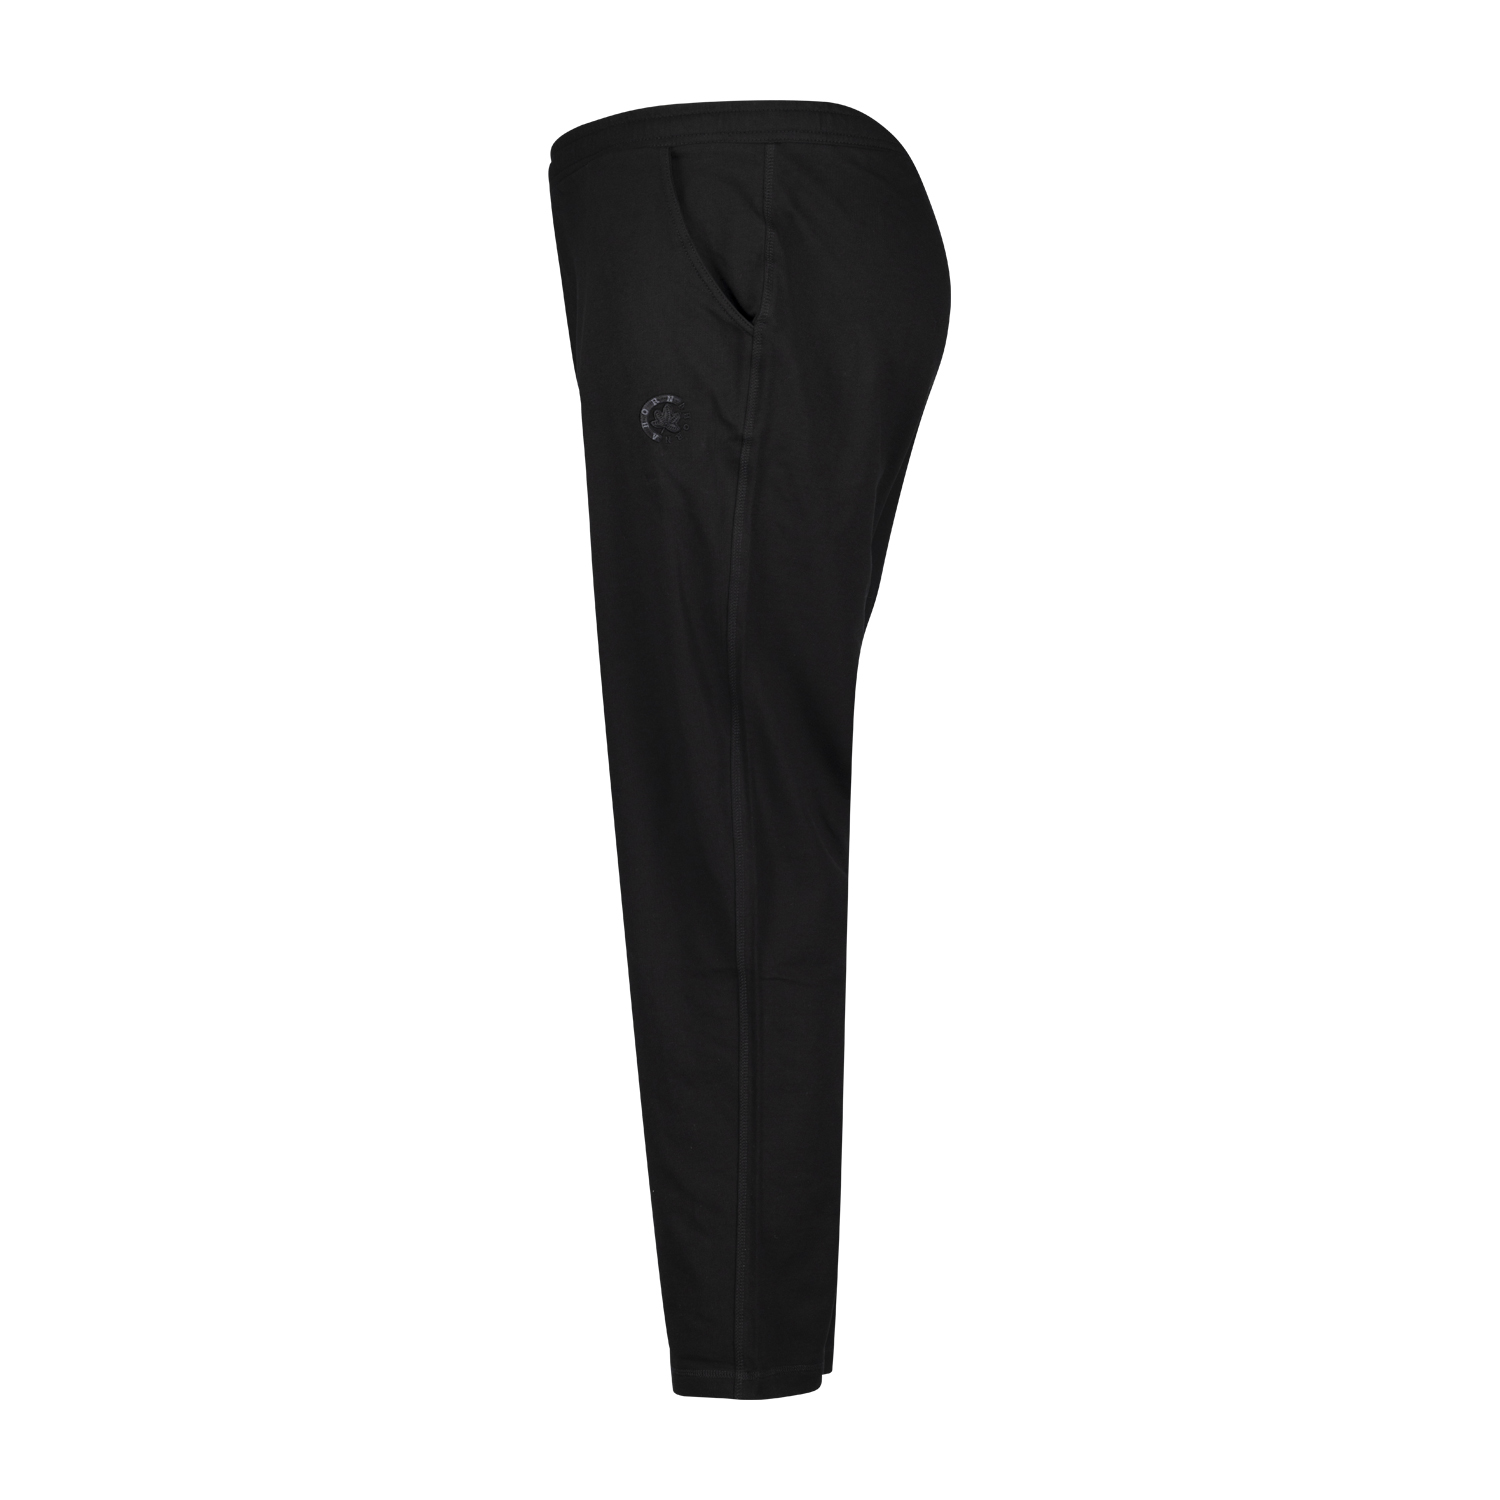 Jogging pants in black by Ahorn Sportswear up to oversize 10XL